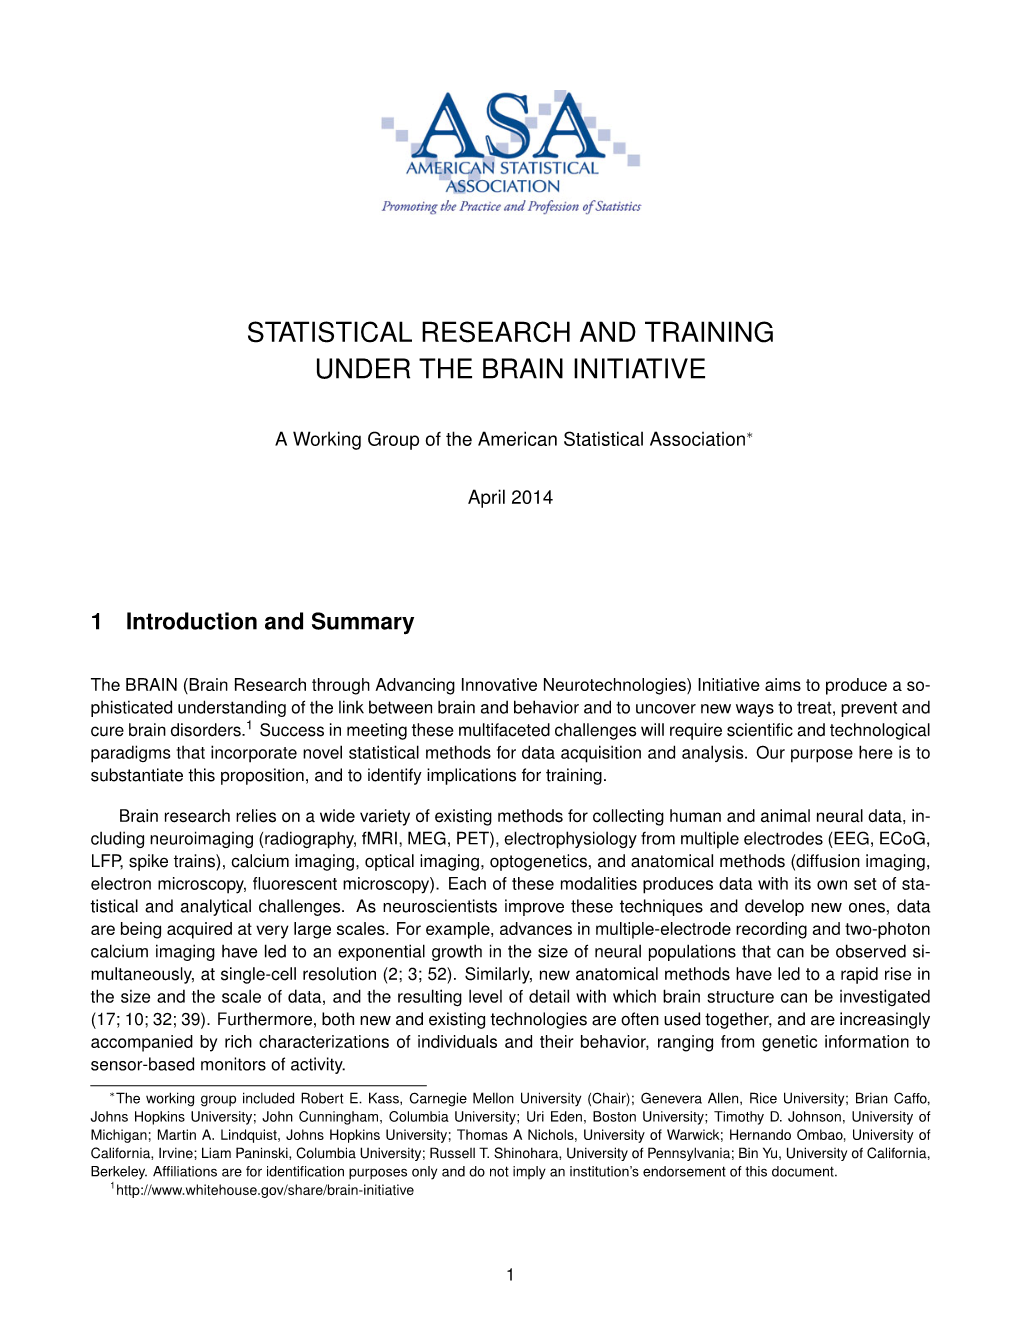 Statistical Research and Training Under the Brain Initiative